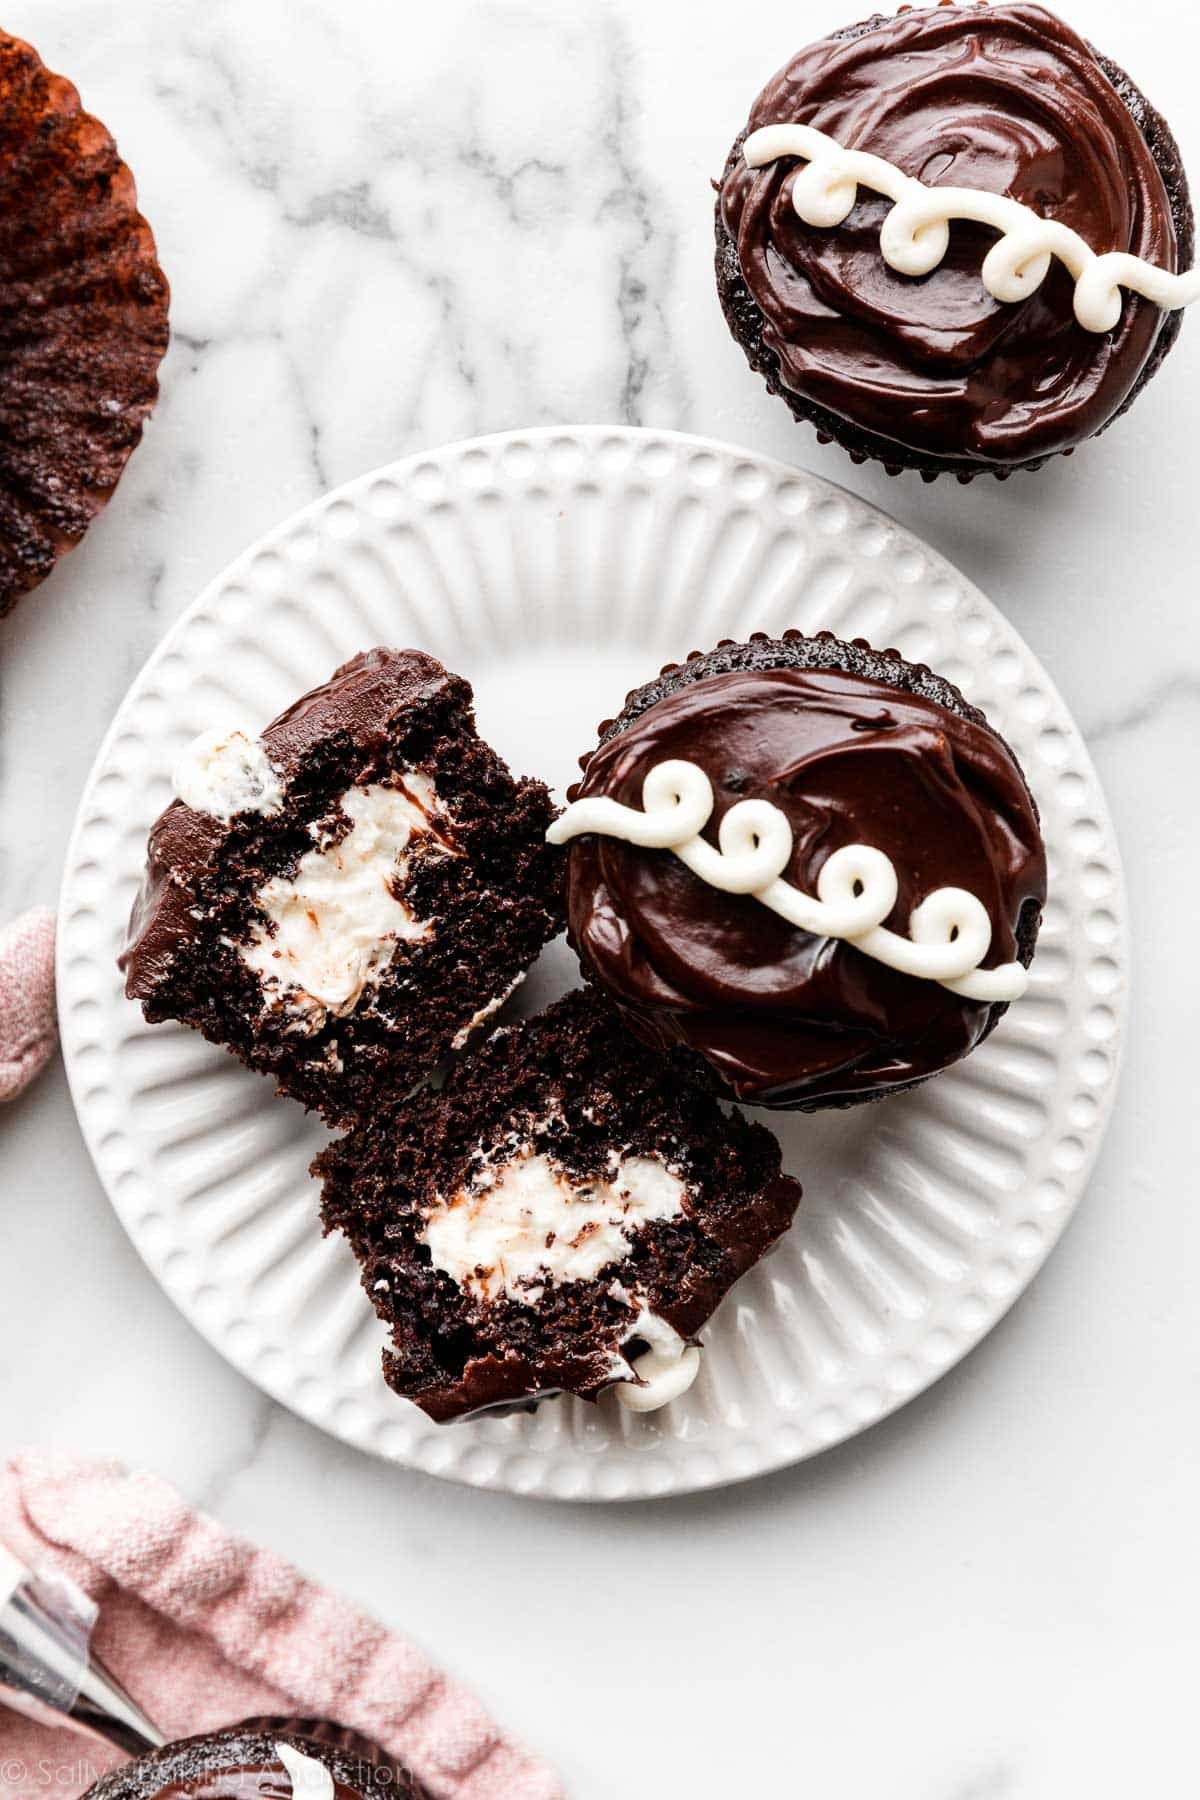 2 Hostess-style homemade cream-filled chocolate cupcakes on white plate.